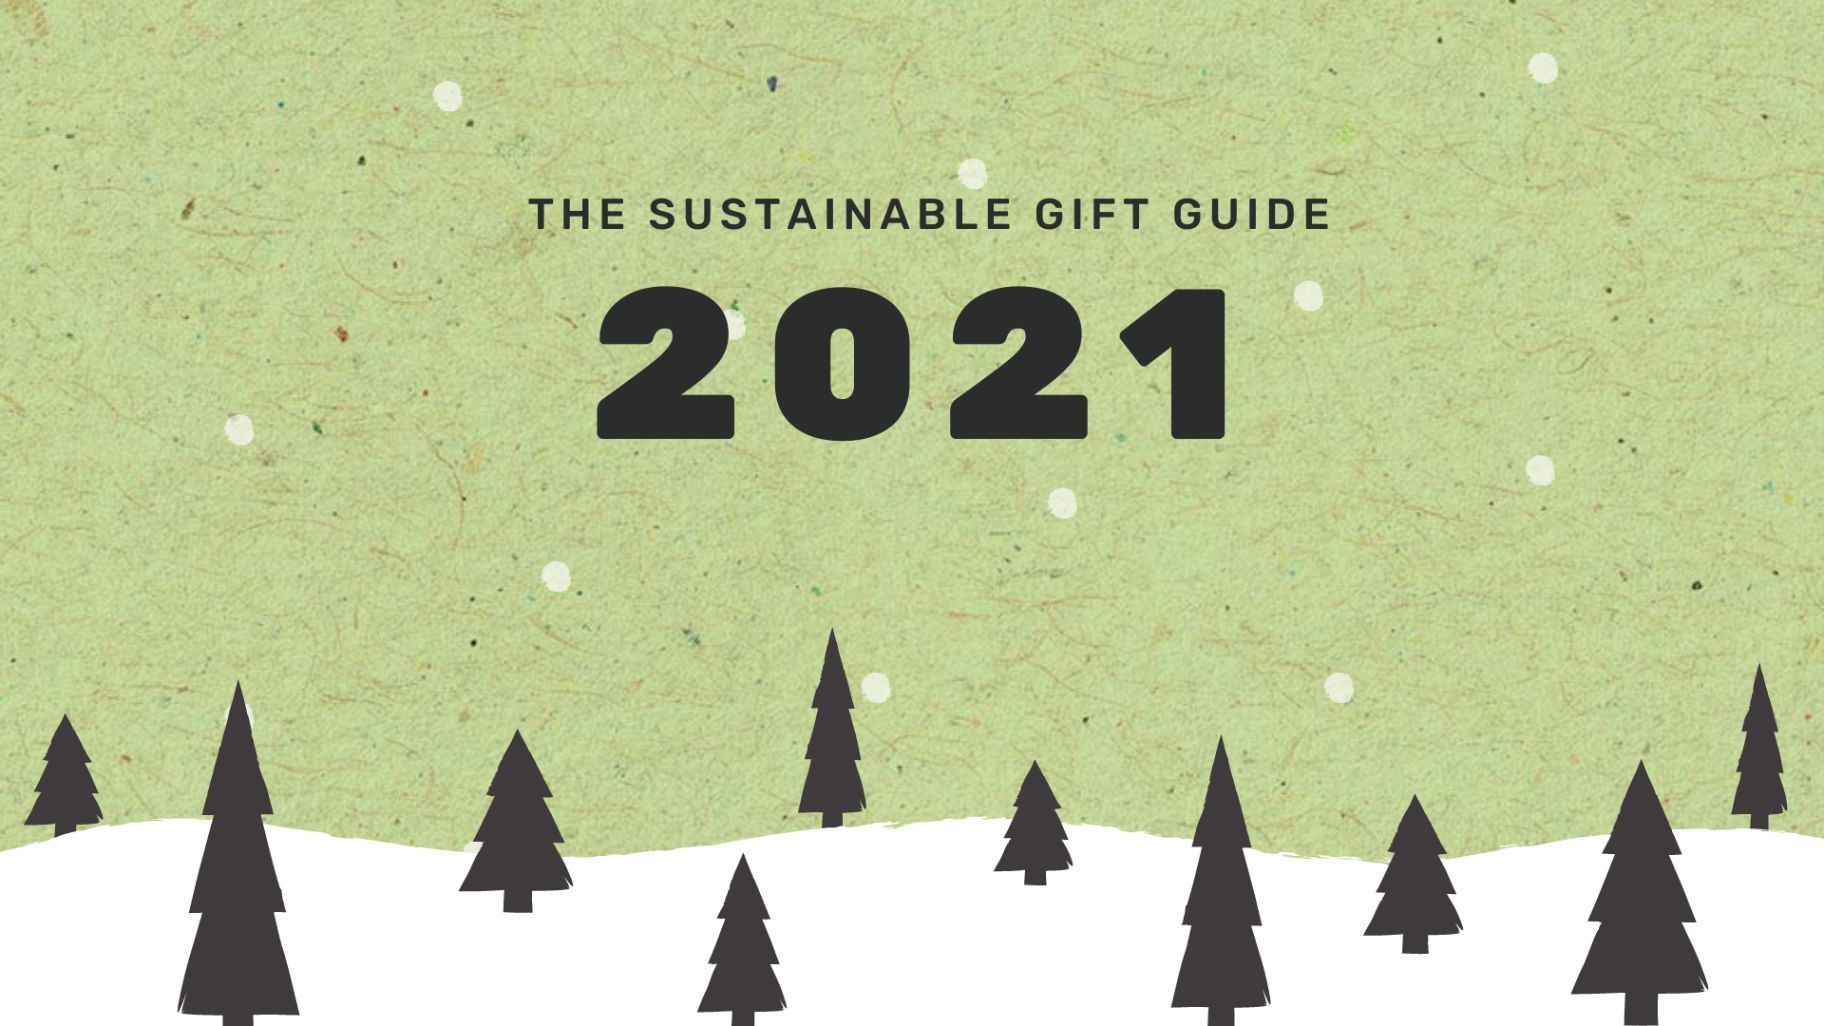 16 Christmas Gift Ideas for the Sustainable Adventure